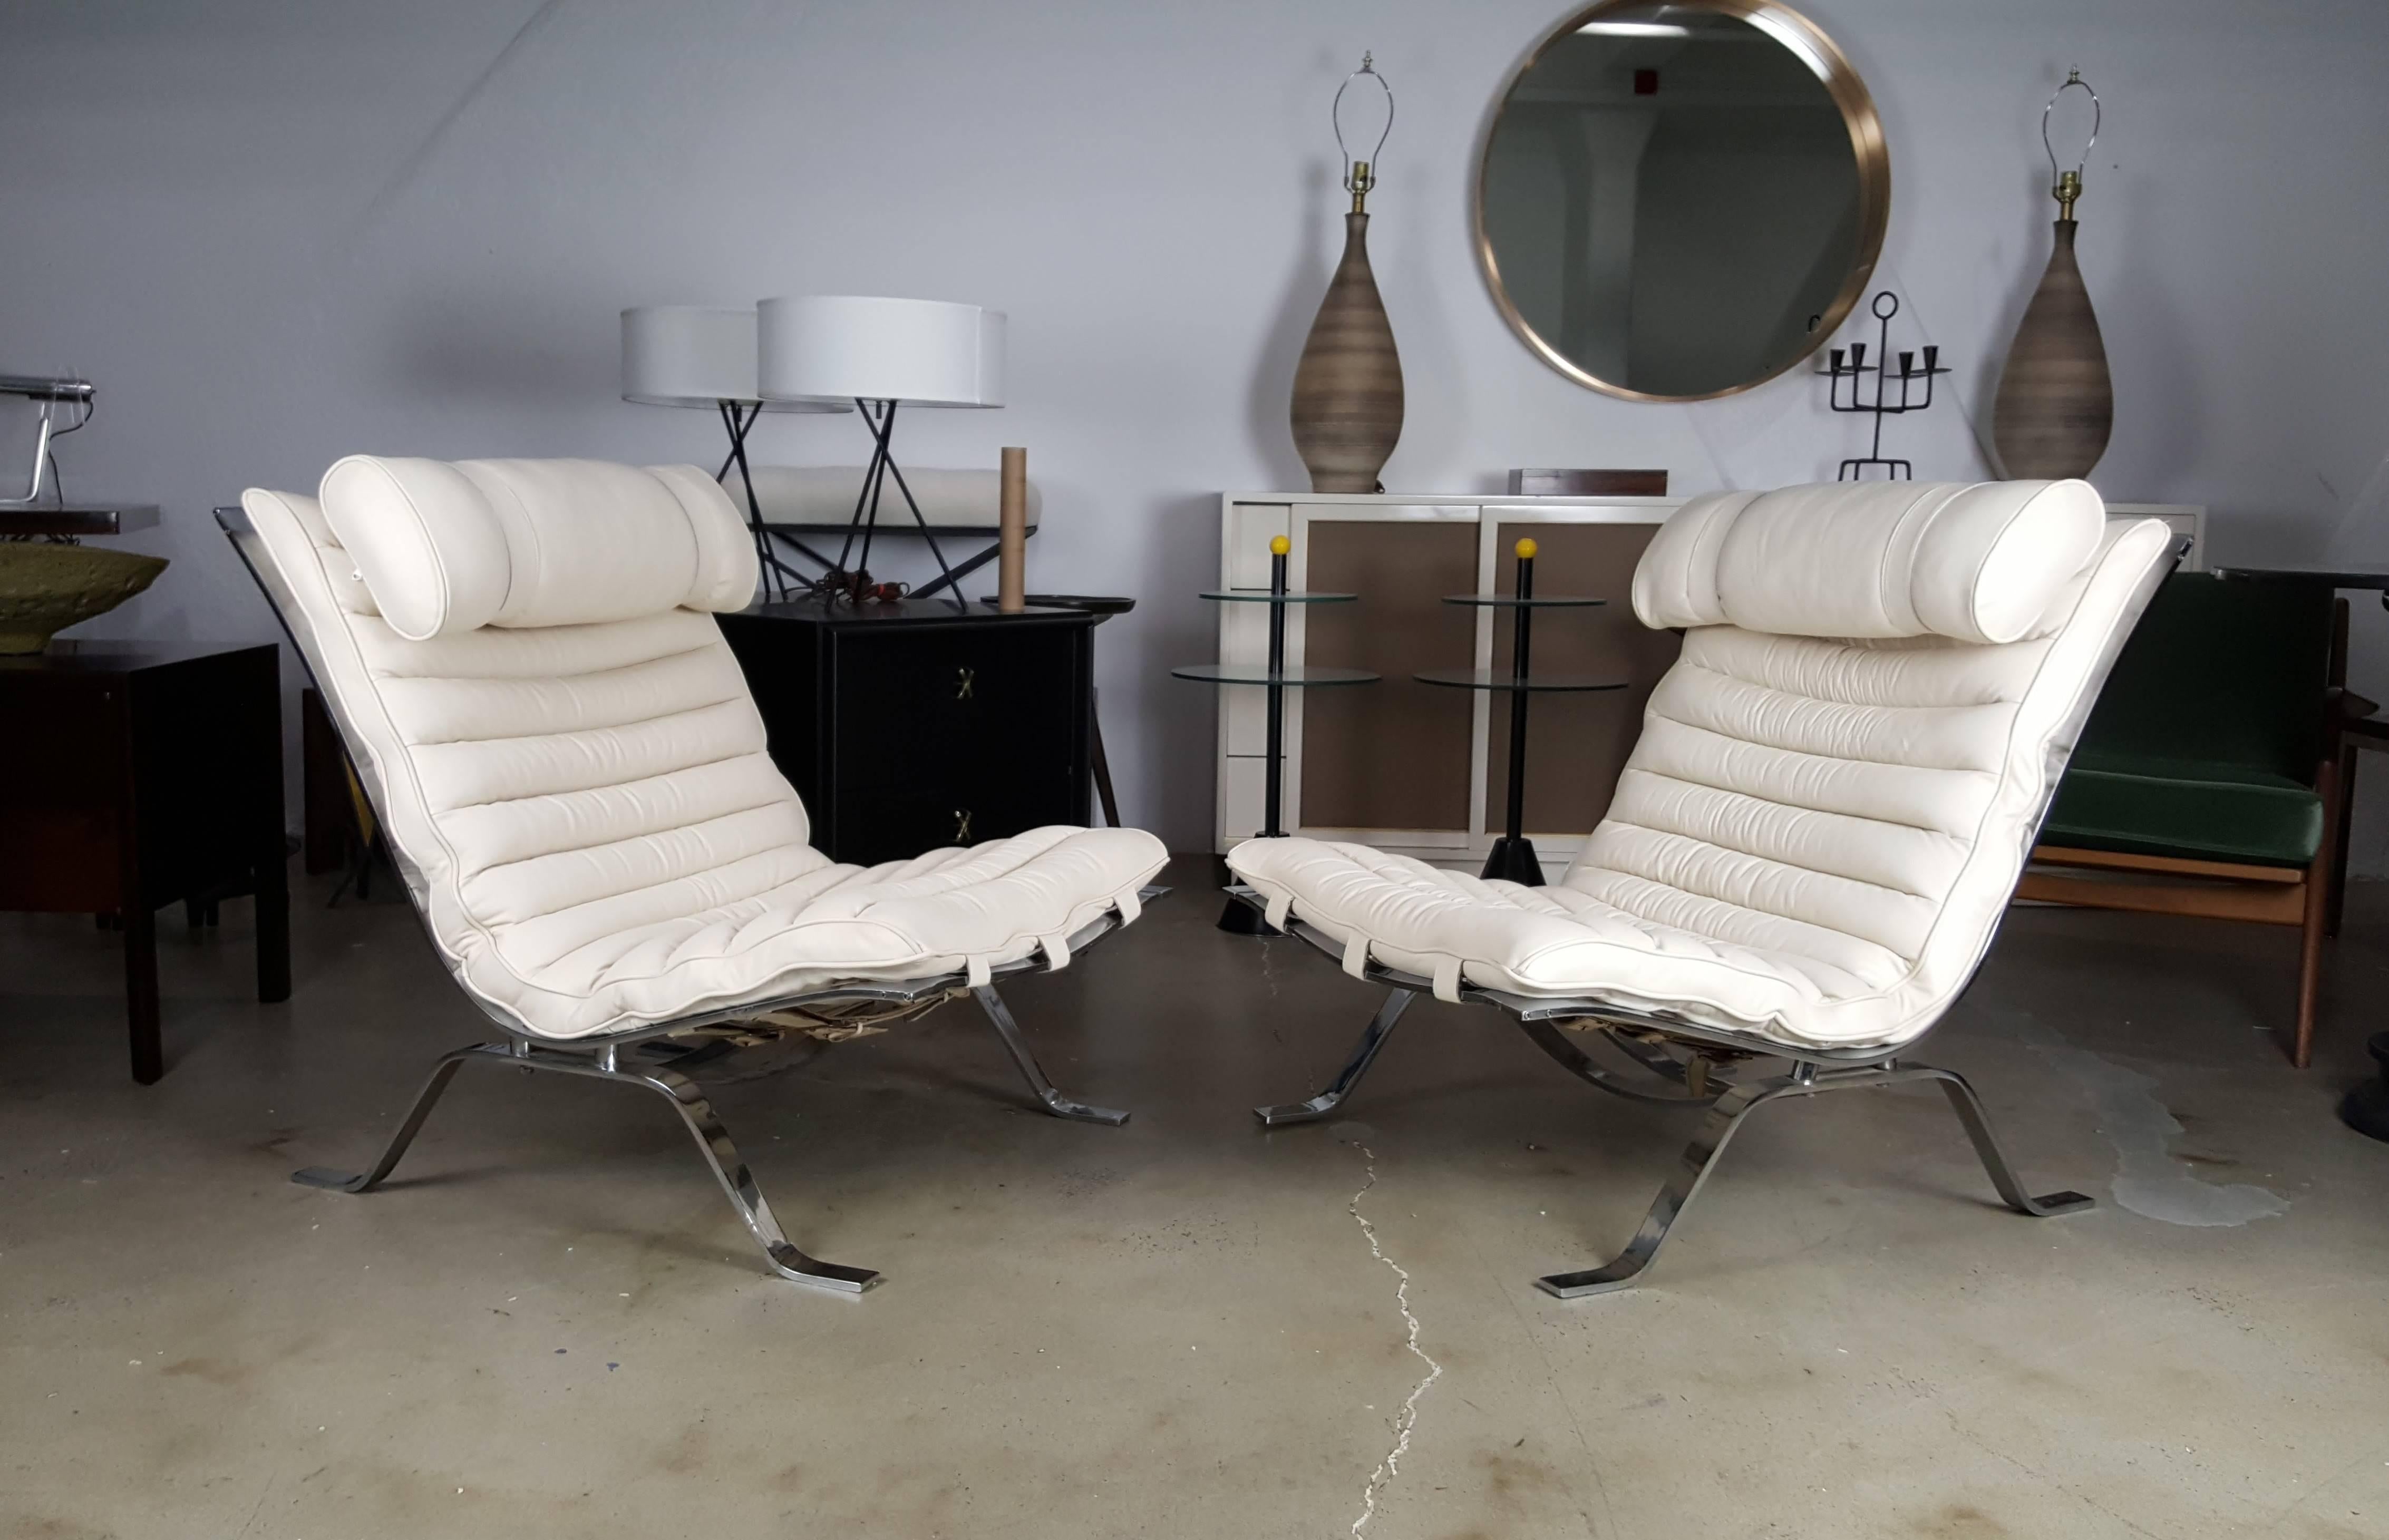 Pair of "Ari" lounge chairs by Arne Norell, Sweden, 1970s. Newly upholstered in a creamy white Italian leather. Excellent overall condition with normal wear to chrome.

See this item in our private NYC showroom! Refine Limited is located